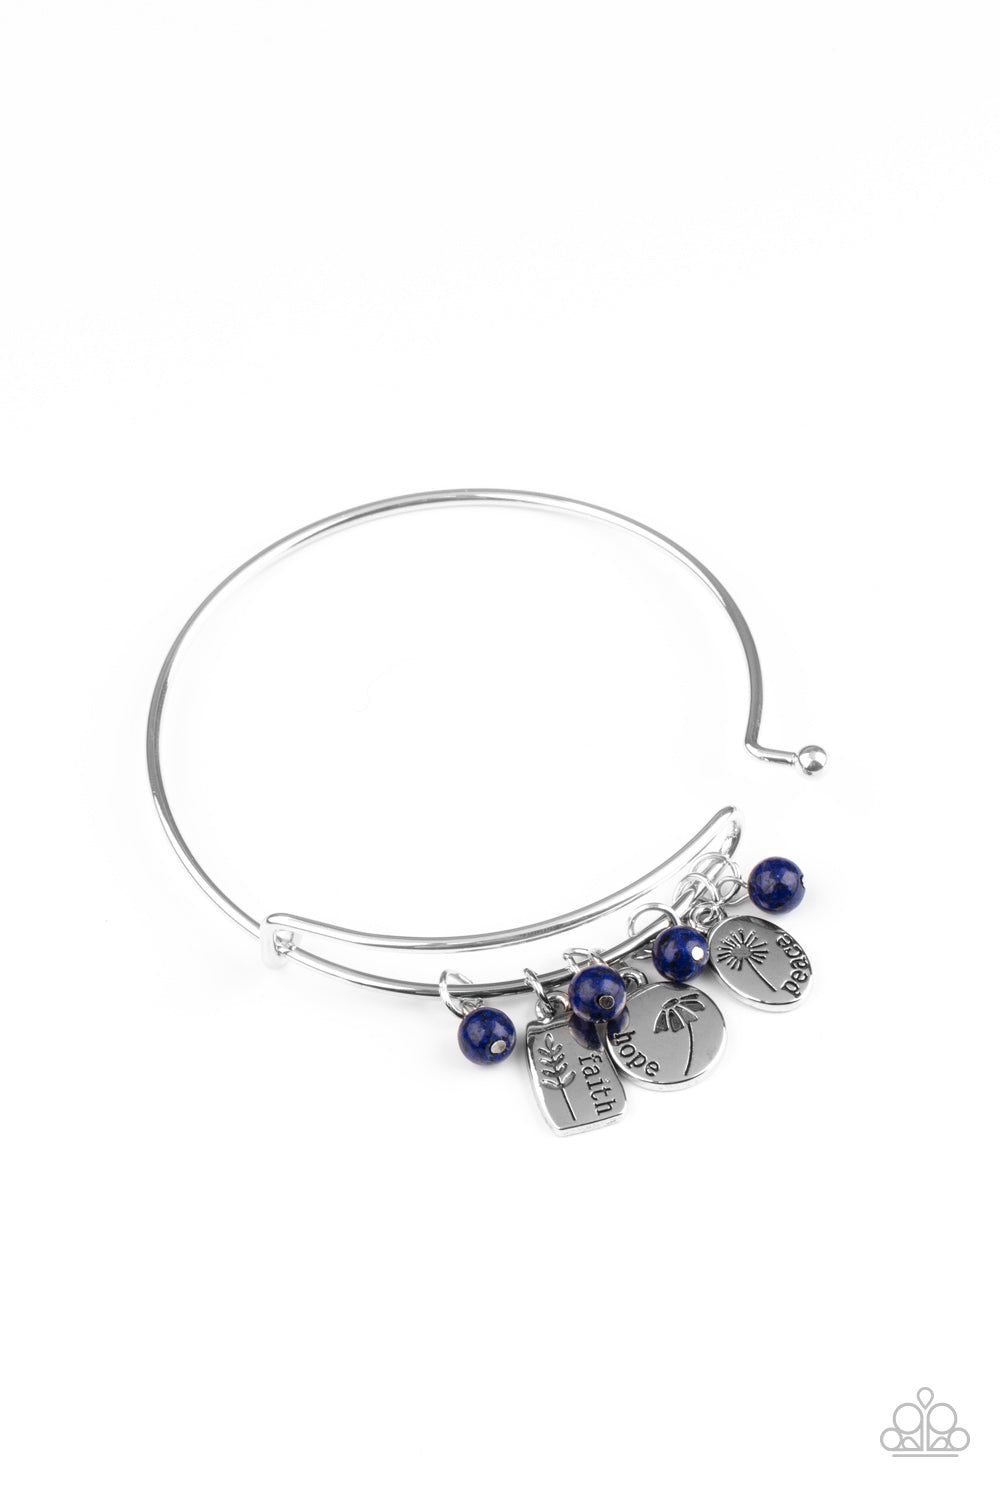 GROWING Strong Blue Inspirational Bracelet - Paparazzi Accessories  Glassy blue stone beads and silver floral charms stamped in the words, "faith," "hope," and "peace," glide along a dainty bangle-like cuff around the wrist for a whimsical flair. Features an adjustable toggle closure.  All Paparazzi Accessories are lead free and nickel free!  Sold as one individual bracelet.